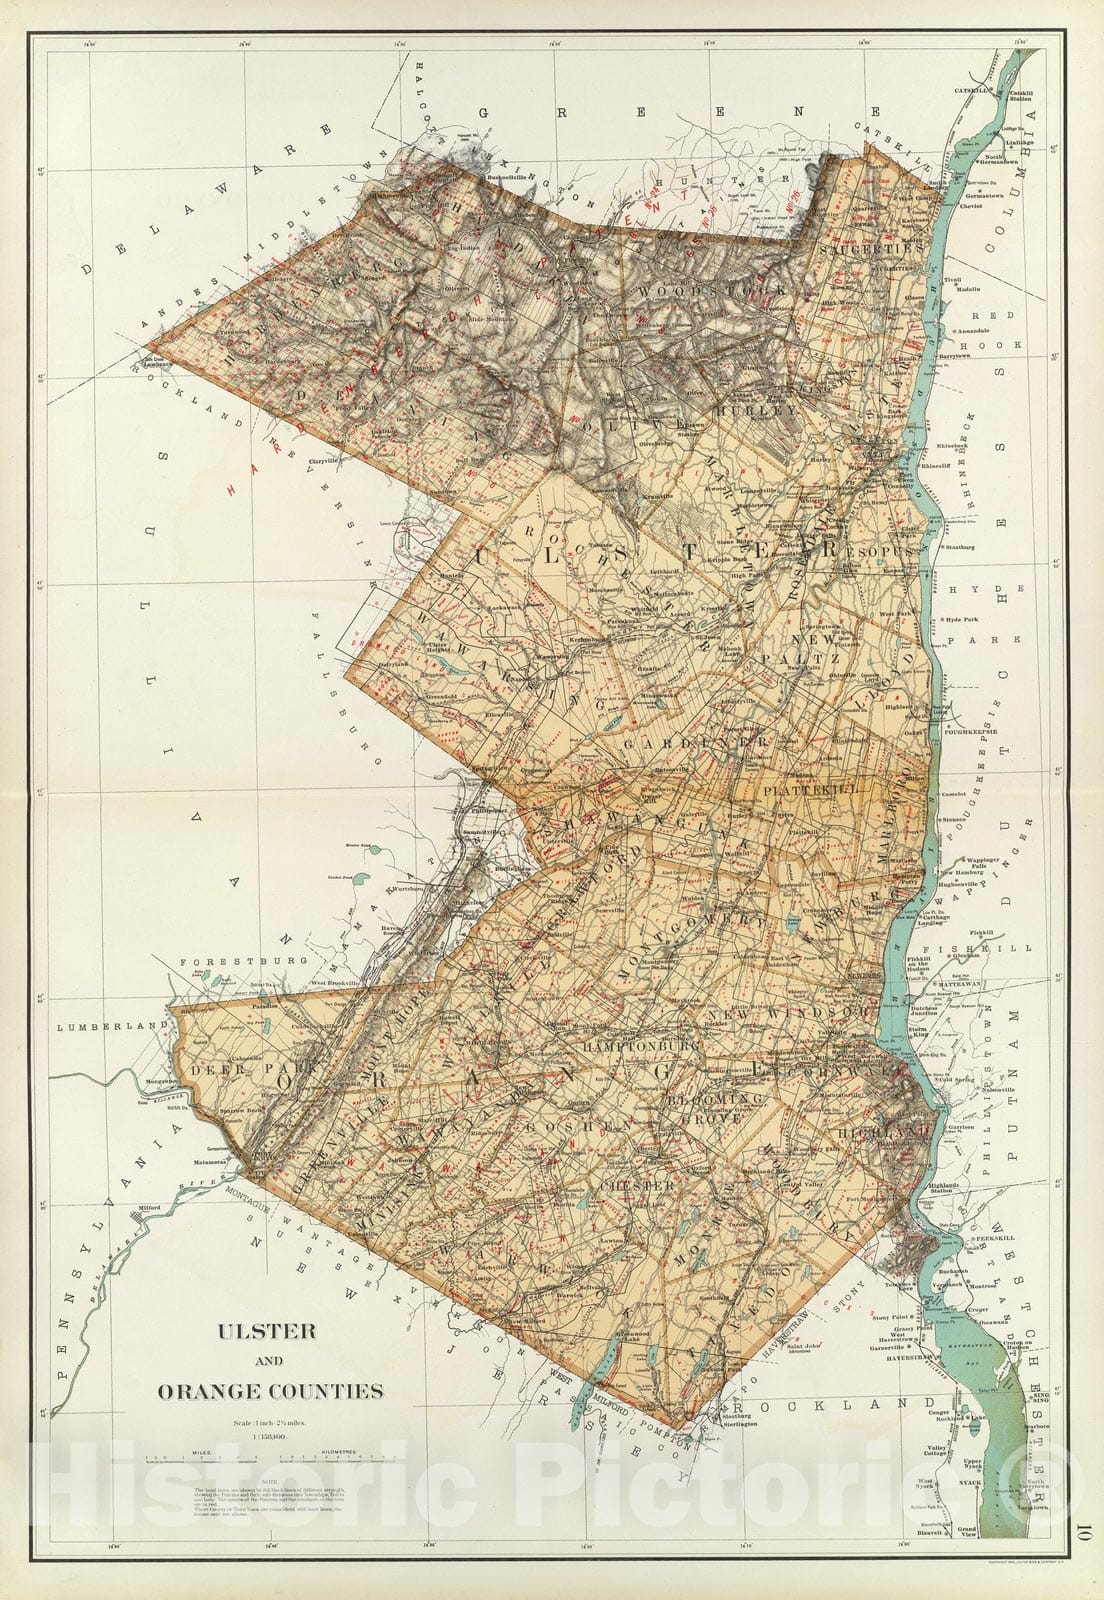 Historic Map : State Atlas Map, Ulster, Orange counties. 1895 - Vintag ...